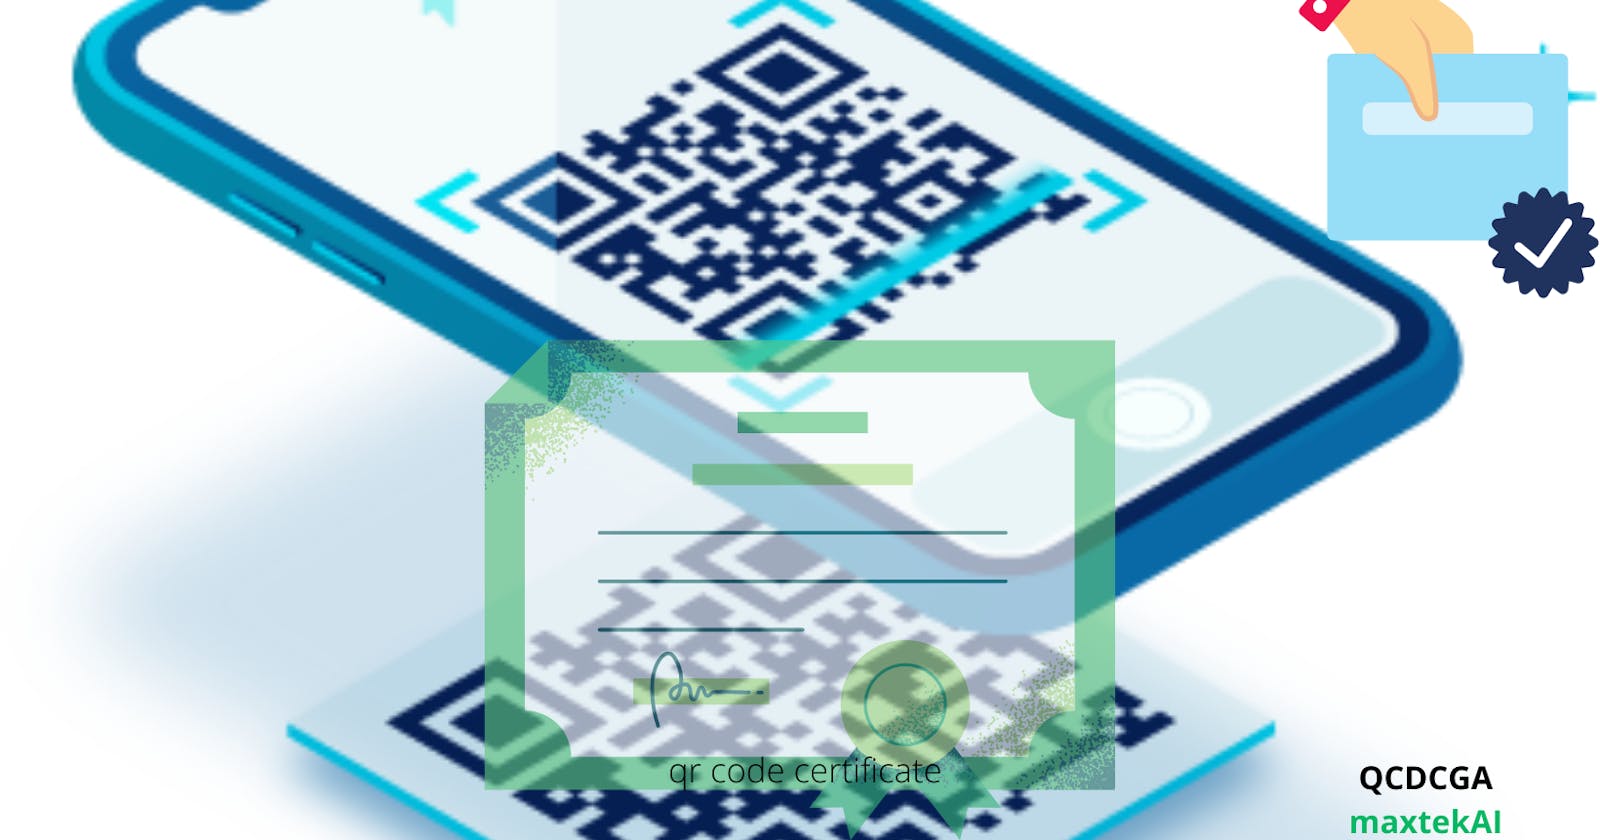 Qr Code Dynamic Certificate Generator and Authentication (QCDCGA) Application